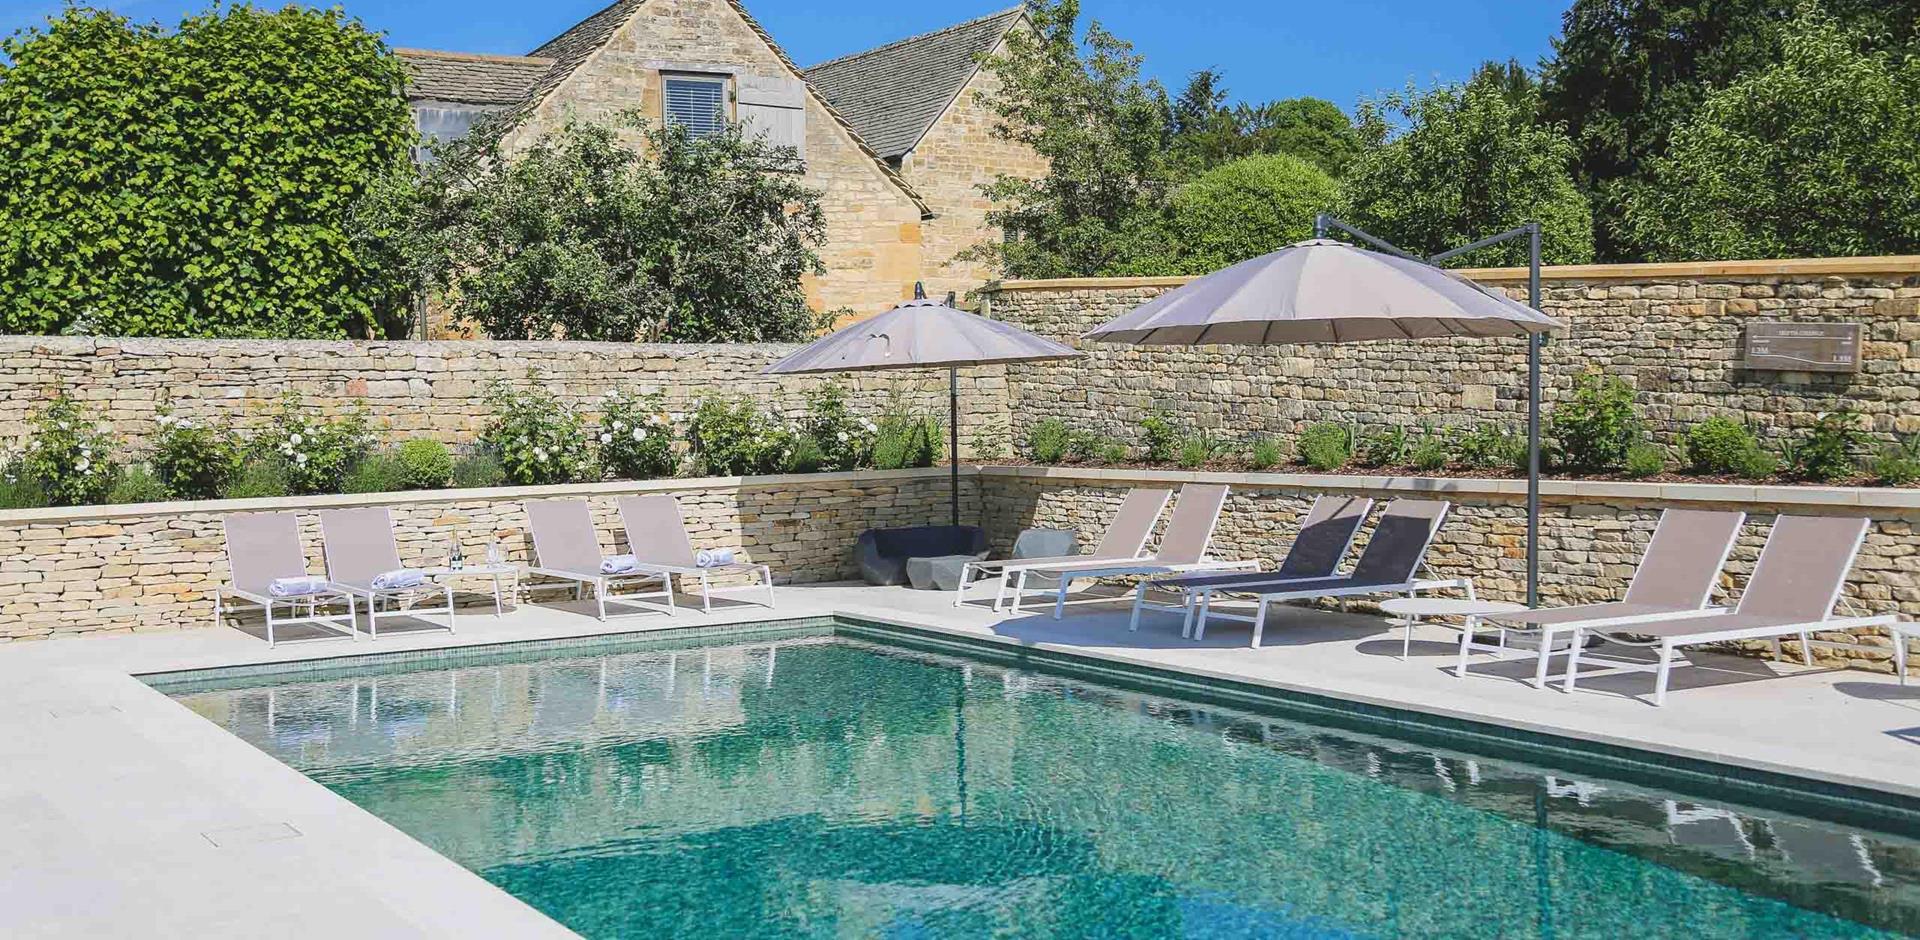 Swimming pool, Temple Guiting Barn, Cotswolds